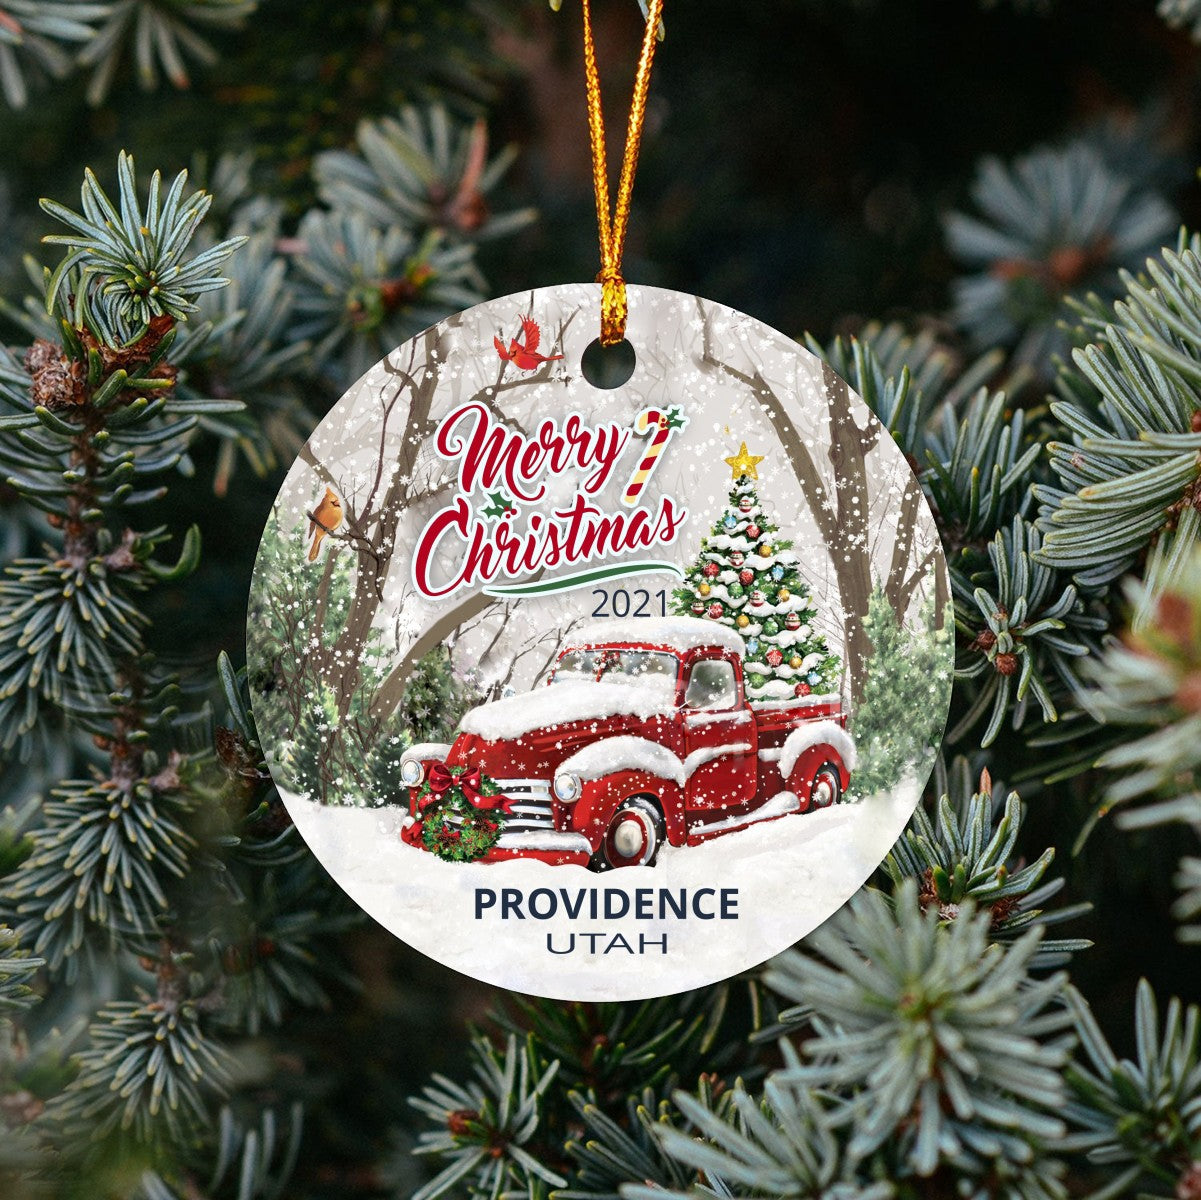 Christmas Tree Ornaments Providence - Ornament Customize With Name City And State Providence Utah UT - Red Truck Xmas Ornaments 3'' Plastic Gift For Family, Friend And Housewarming